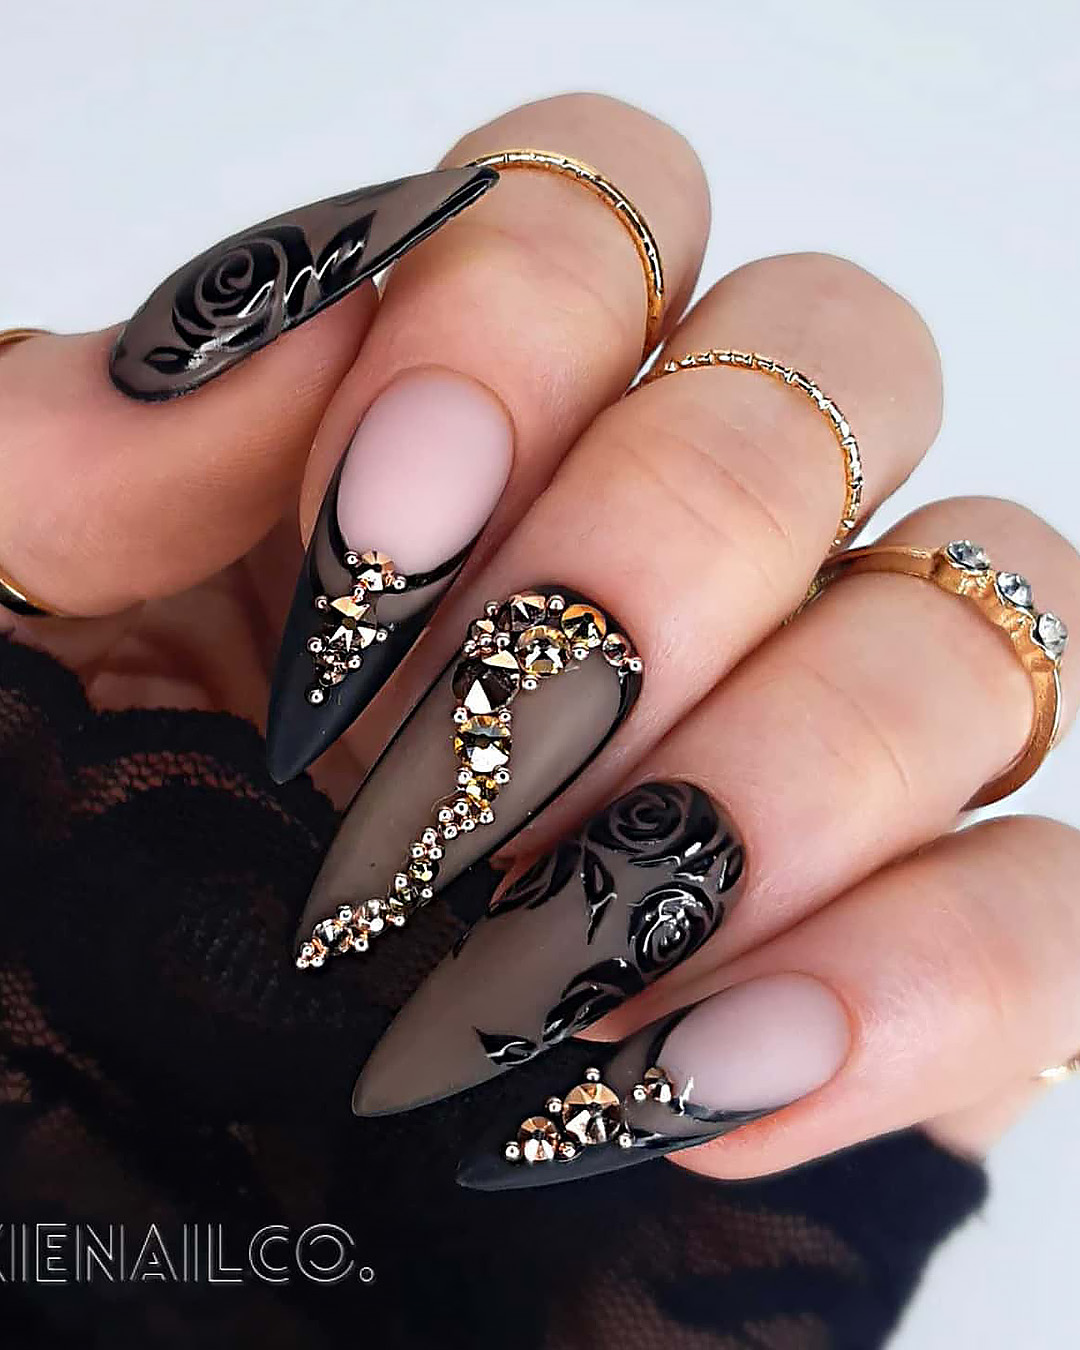 black and gold wedding nails transparent with rhinestones pixienailco - Black and Gold Wedding Nail Designs